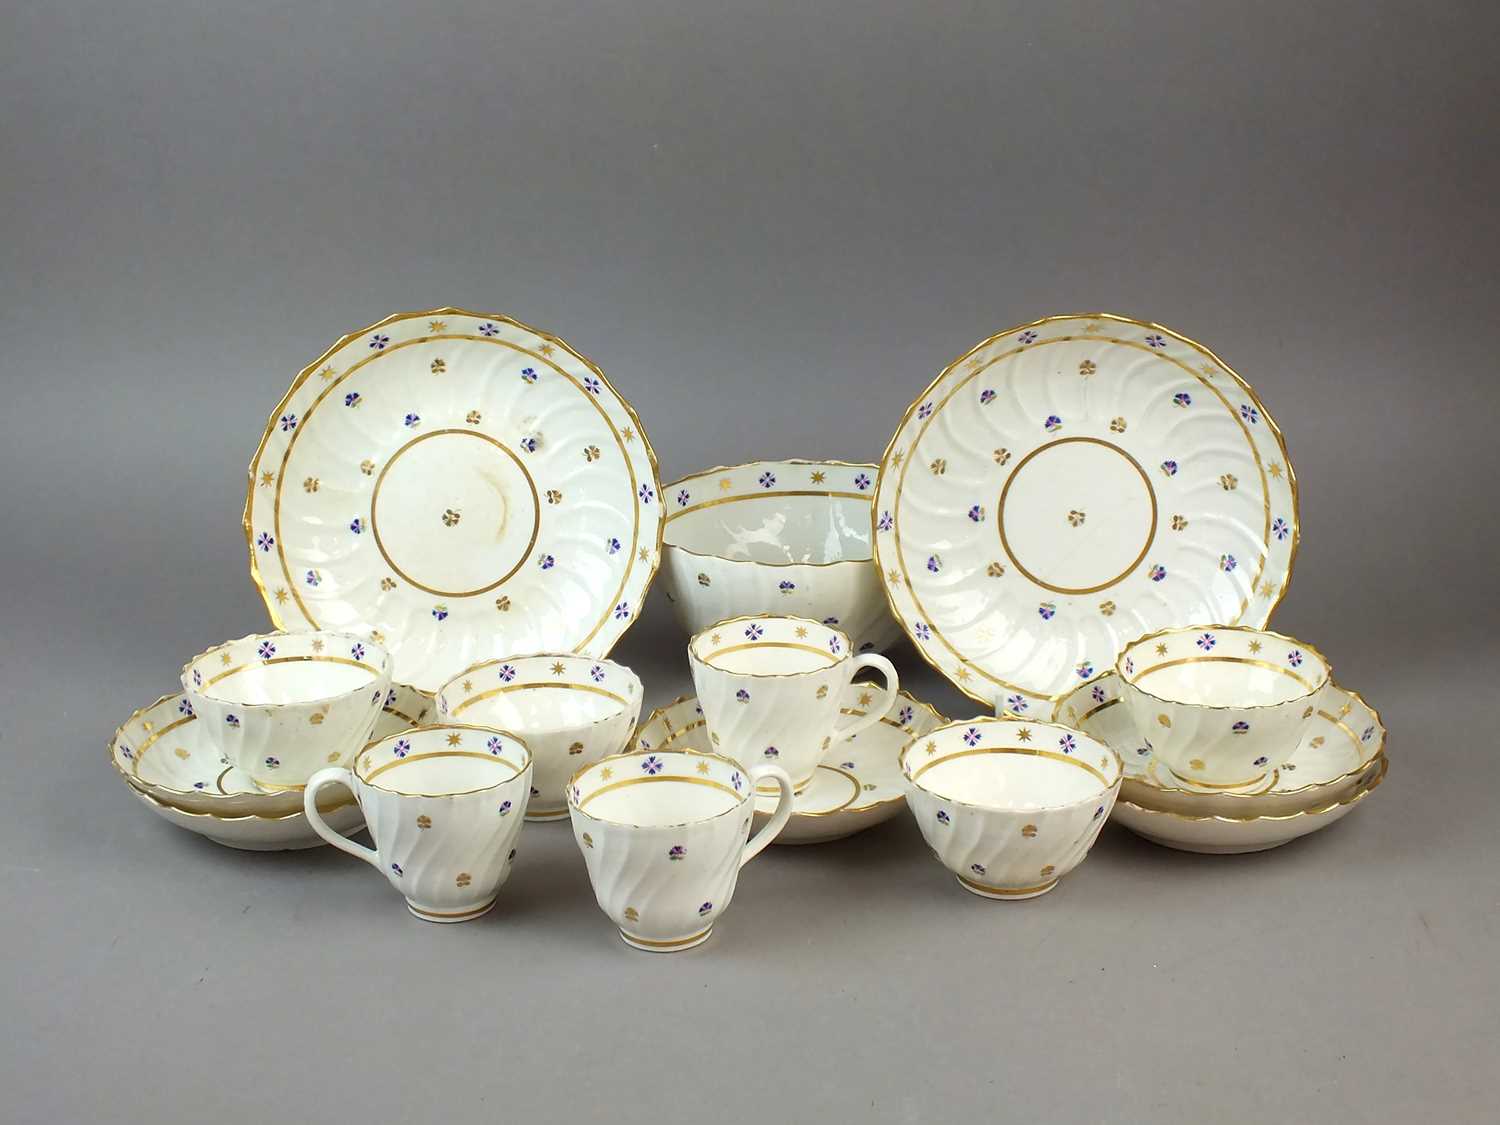 Lot 210 - A Caughley 'French Sprigs' tea and coffee service, circa 1790